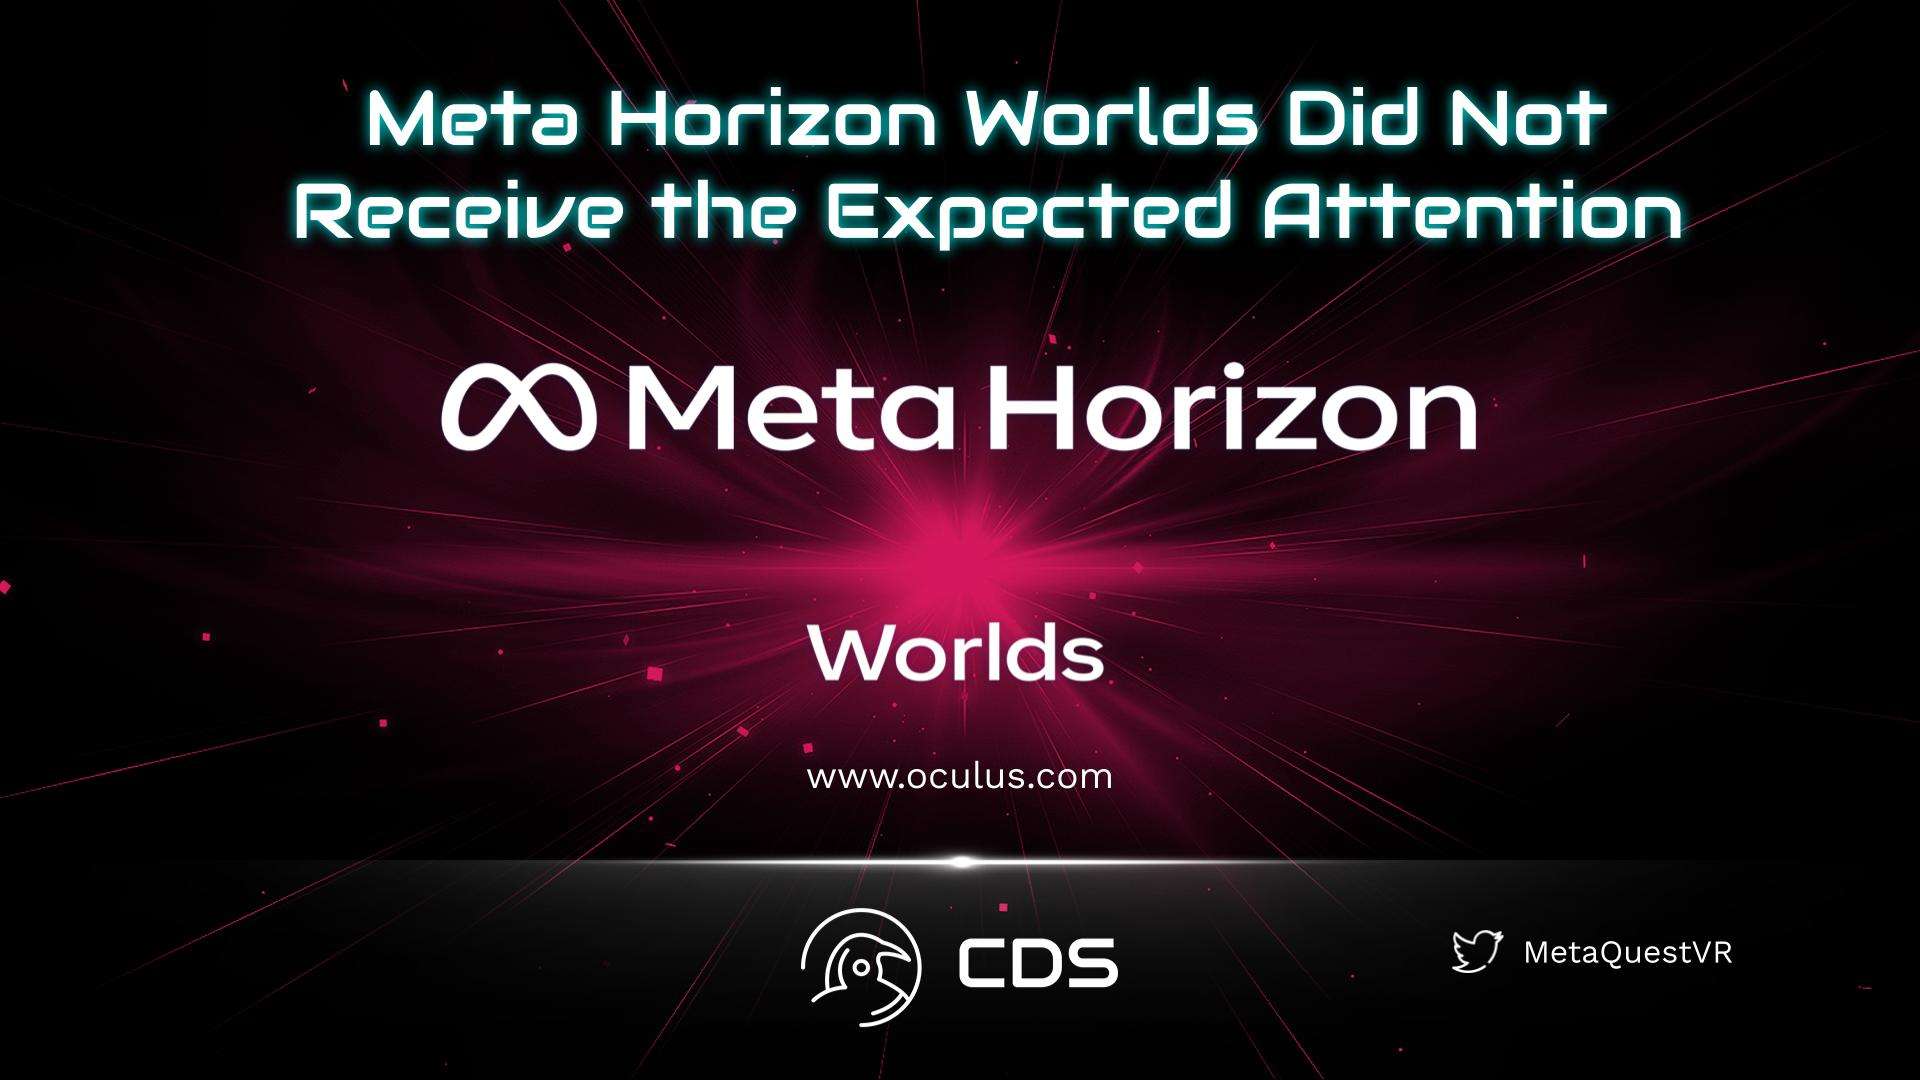 Meta Horizon Worlds Did Not Receive the Expected Attention